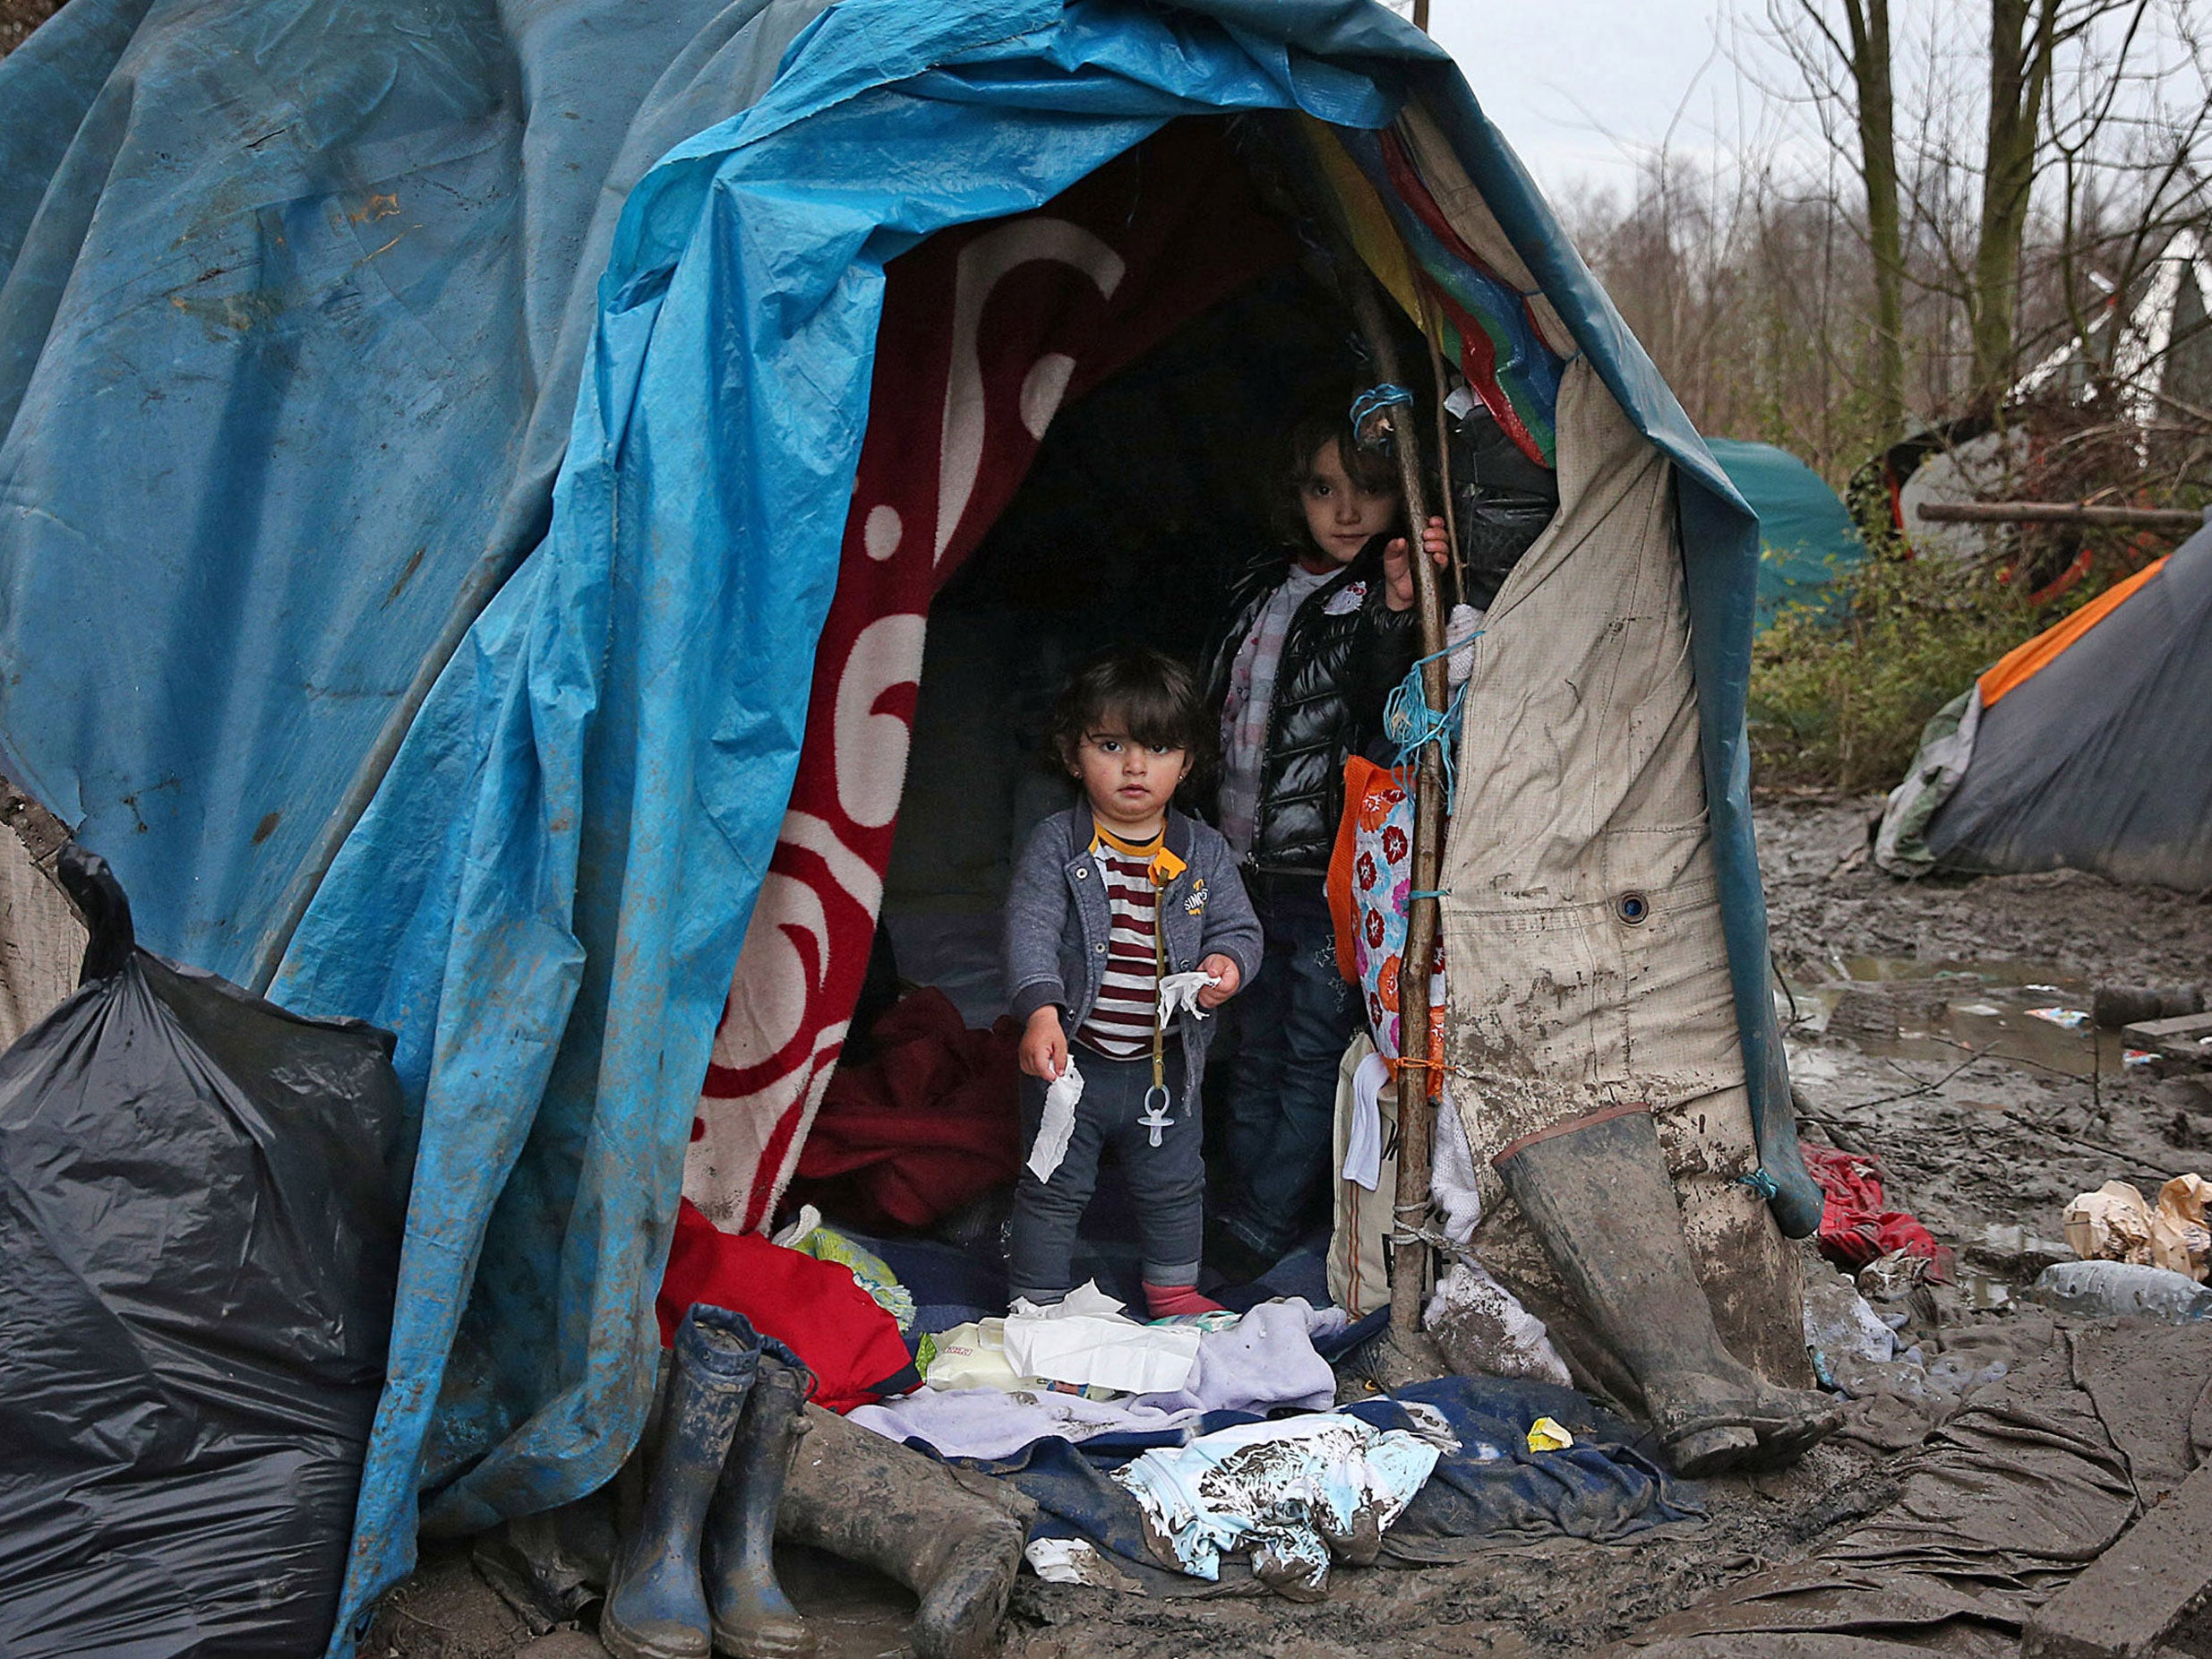 Children stand at the entrance to their shelter in a migrant camp in Dunkirk during harsh winter conditions